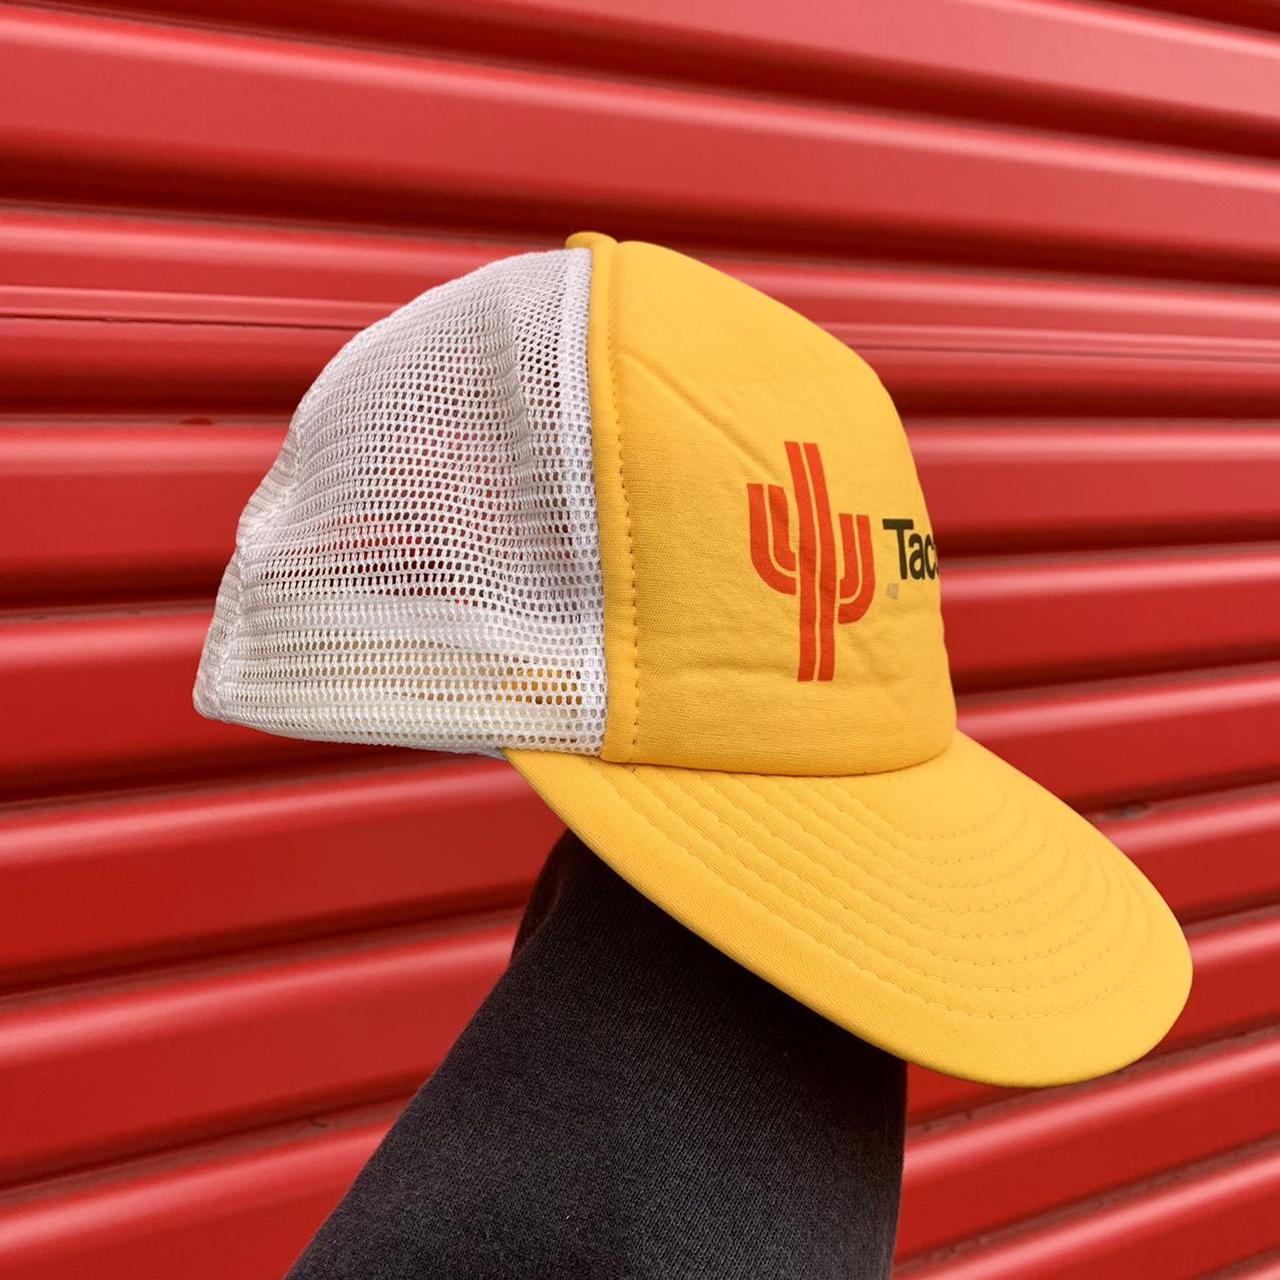 Product Image 2 - VINTAGE TACO TIME SNAPBACK 💛🌮

SUCH